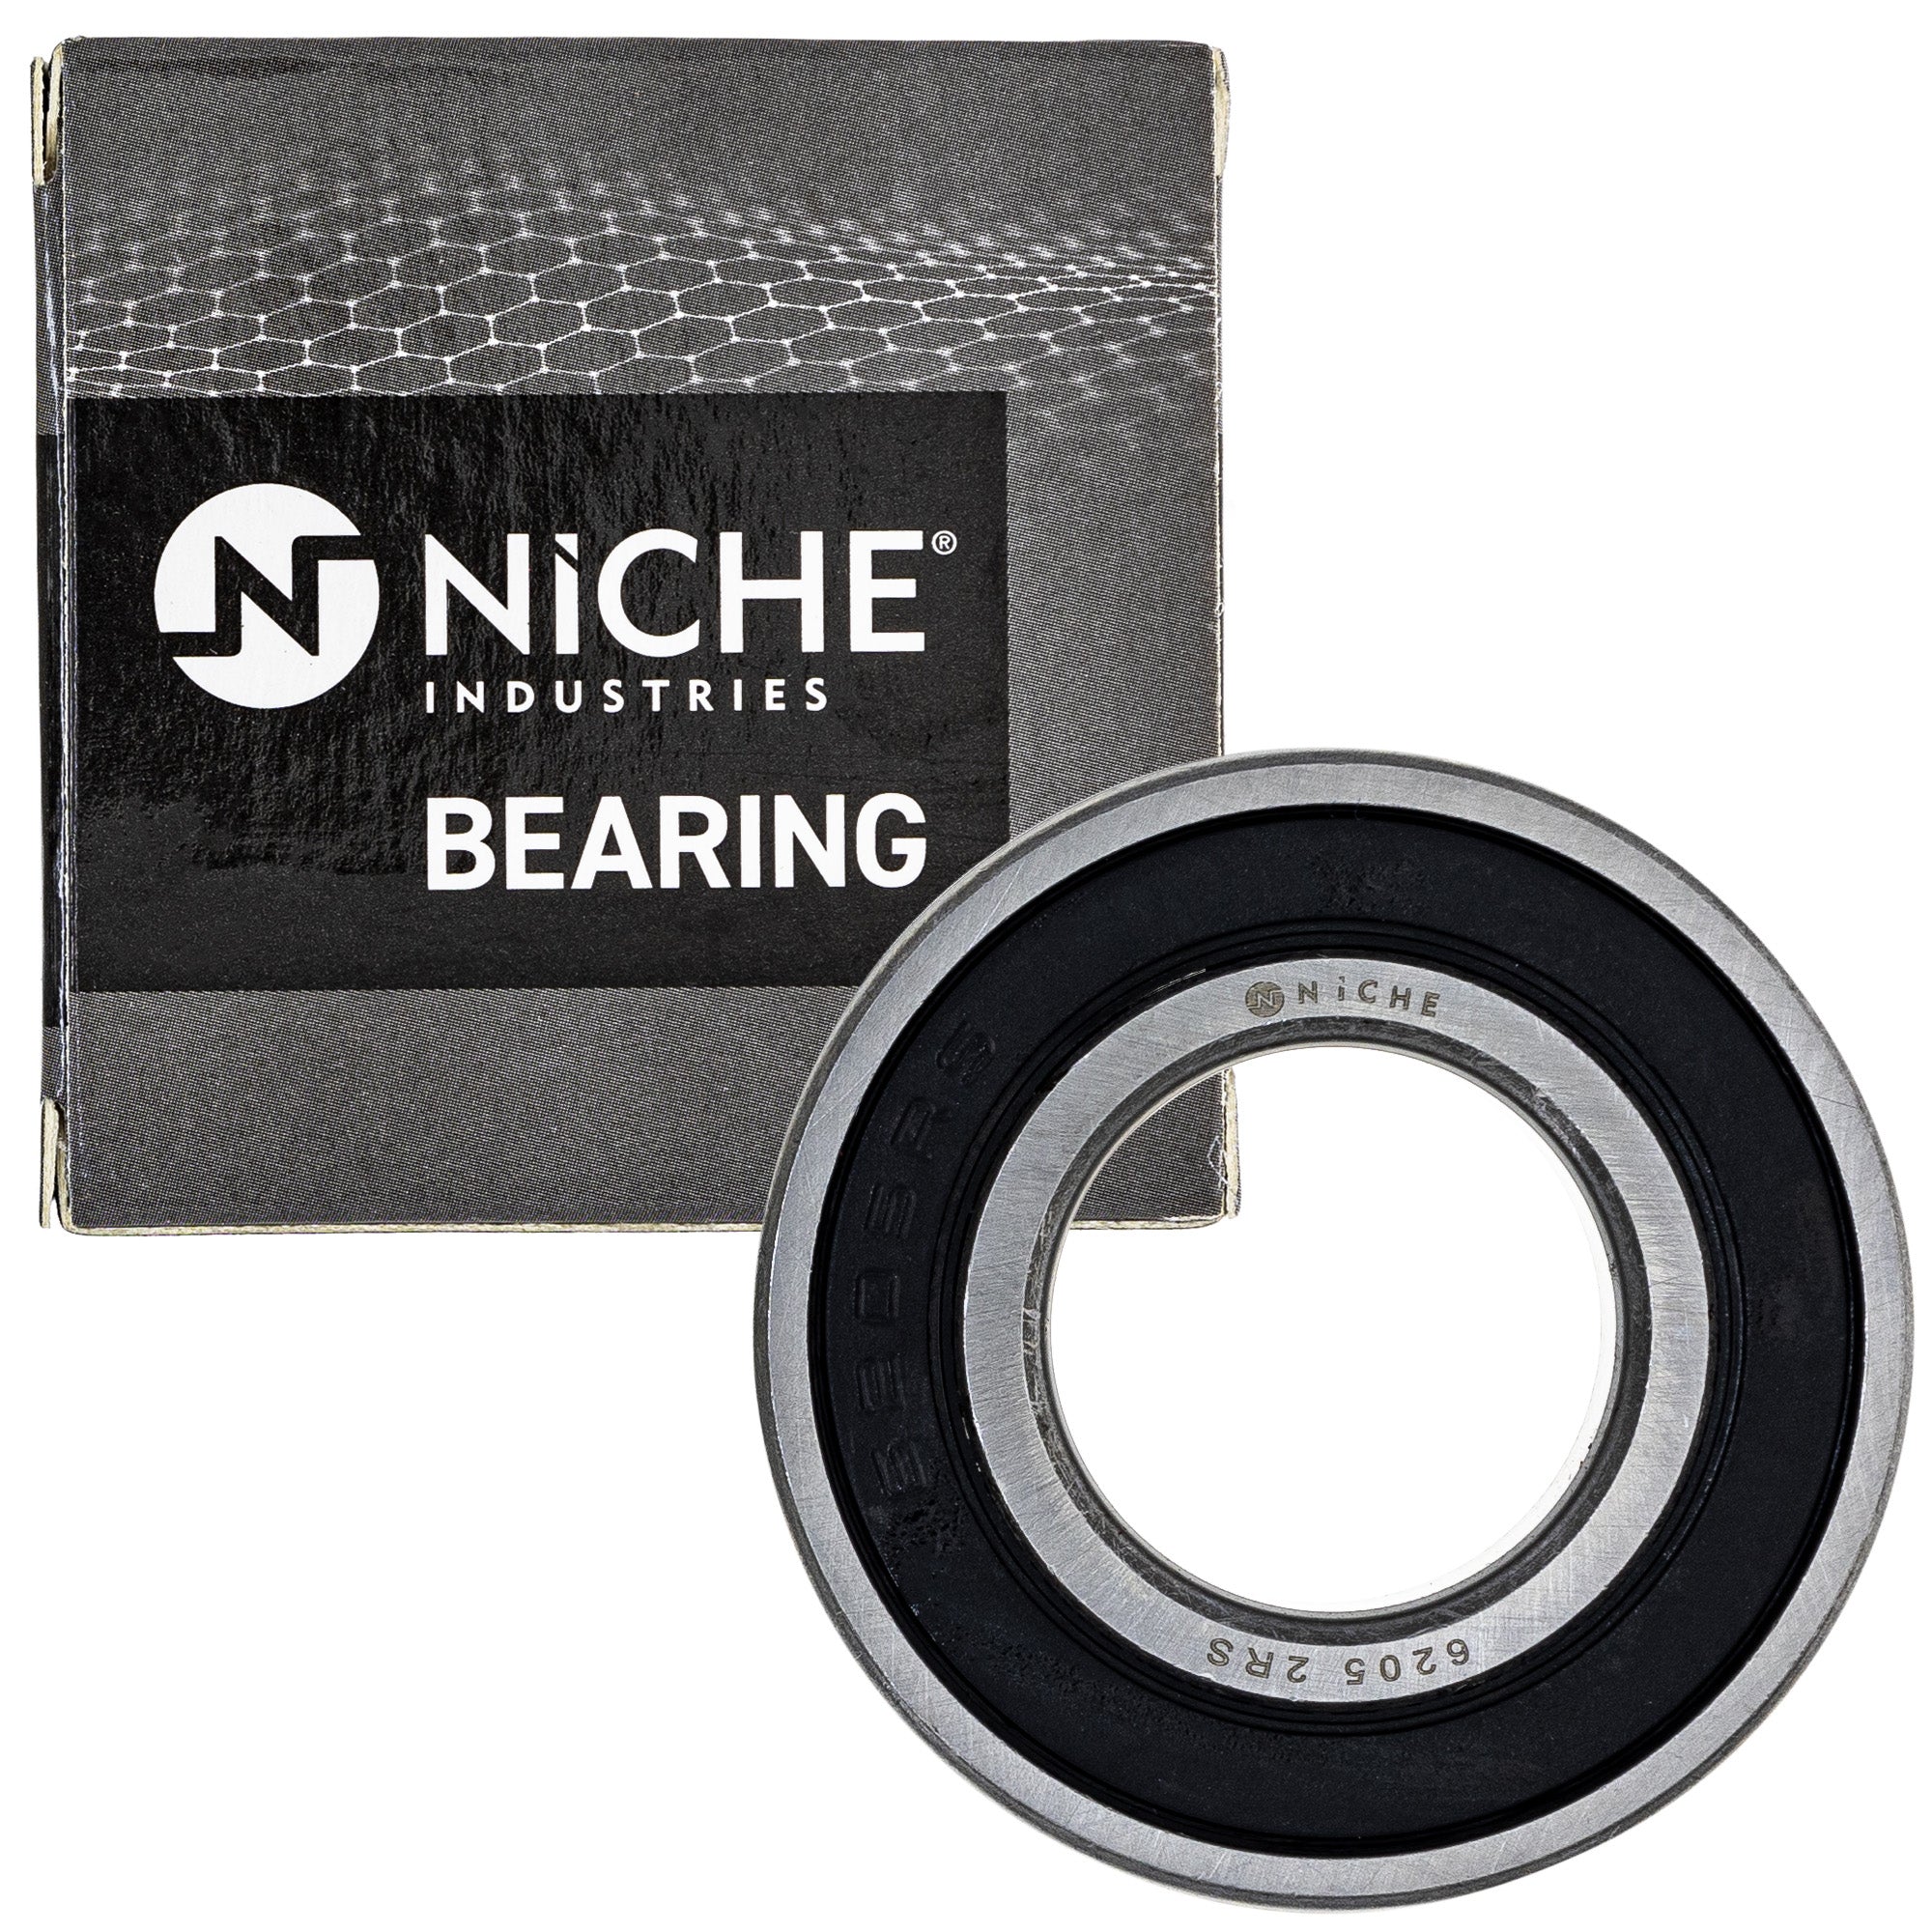 NICHE MK1009211 Wheel Bearing Seal Kit for zOTHER Ref No ZZR600